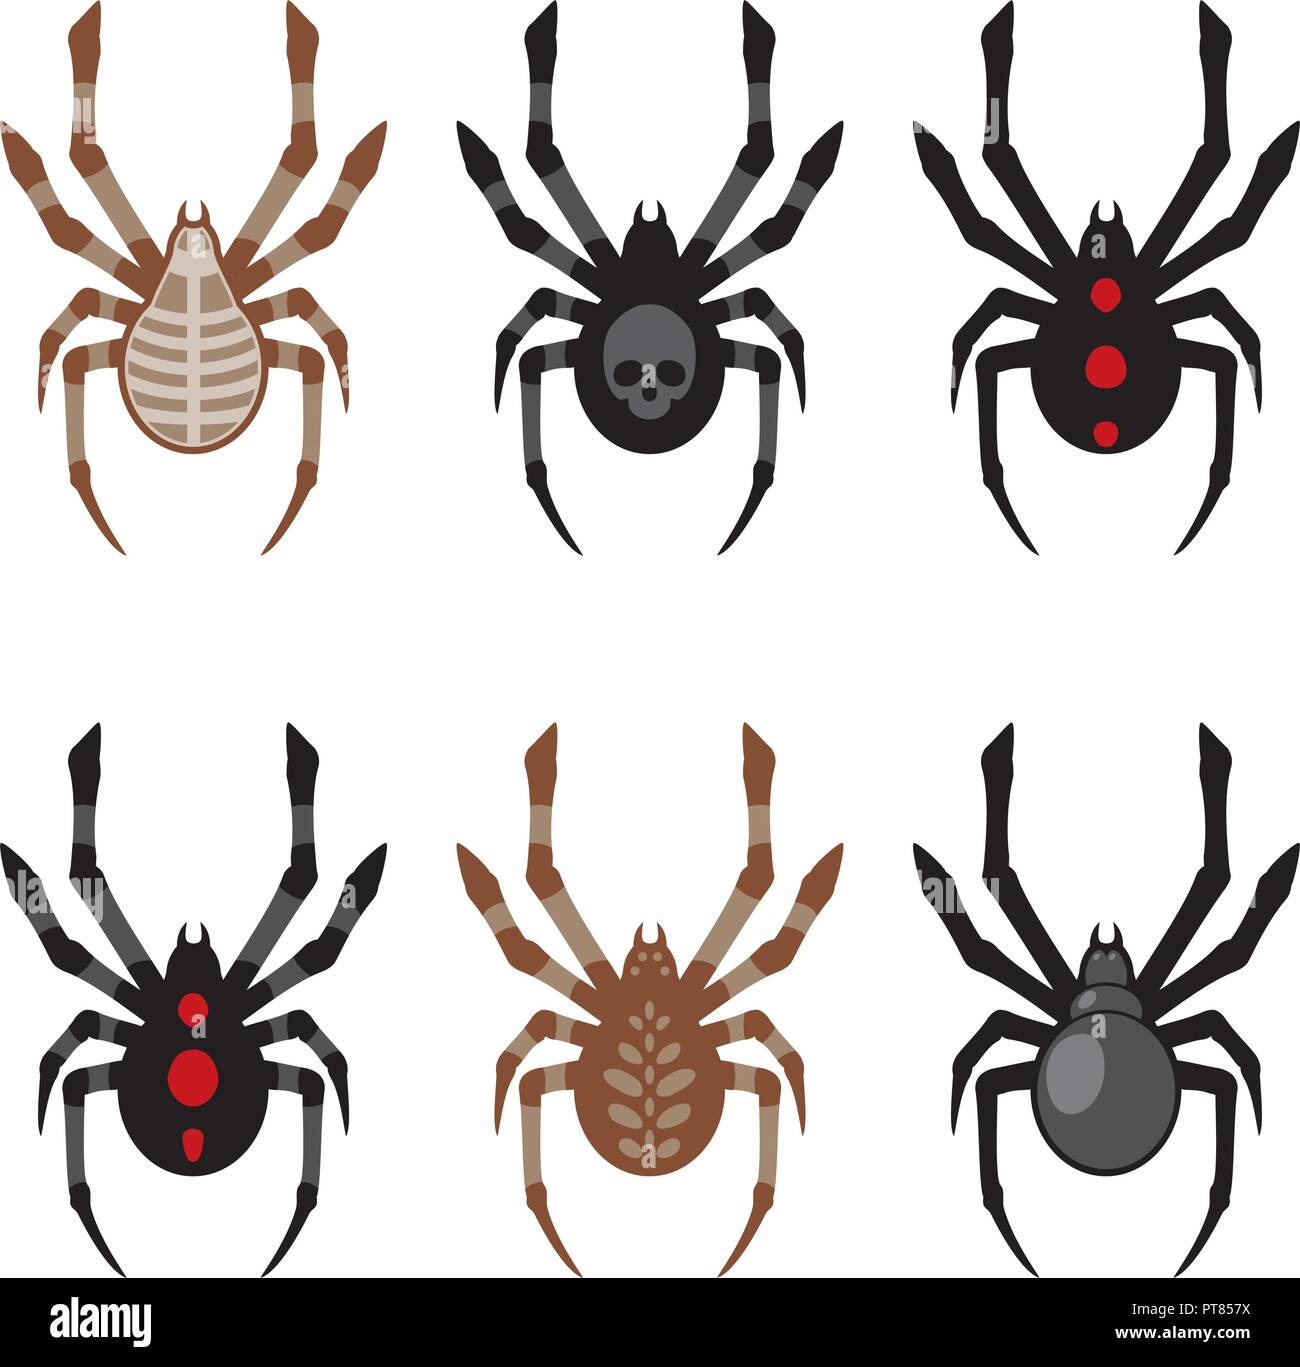 vector set of spider icons. collection of cartoon spiders isolated on white background Stock Vector